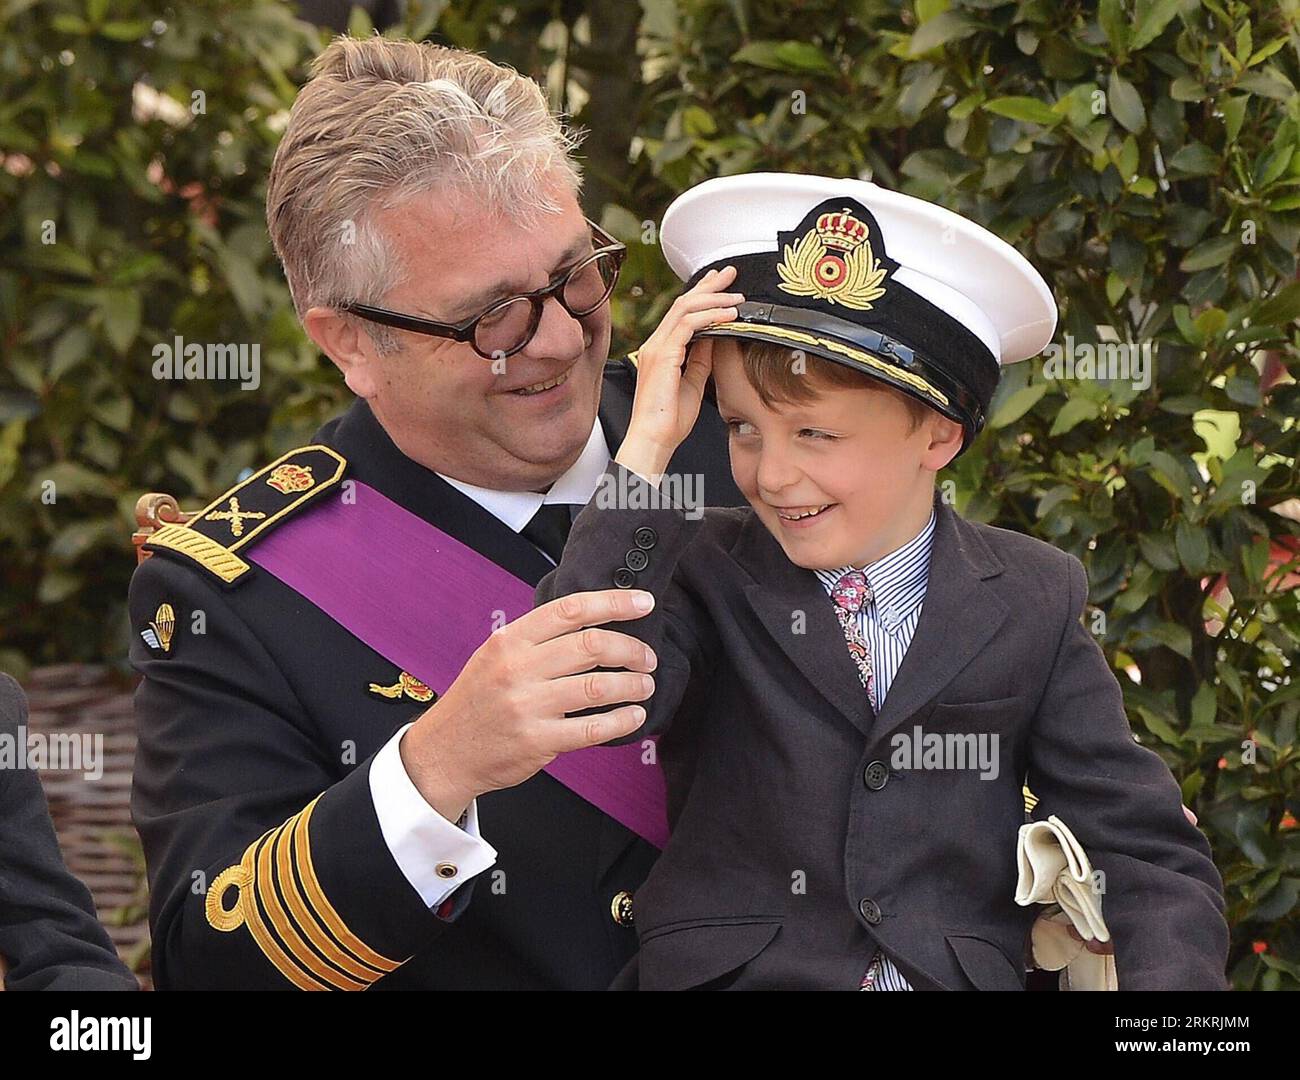 Bildnummer: 58270841  Datum: 21.07.2012  Copyright: imago/Xinhua (120721) -- BRUSSELS, July 21, 2012 (Xinhua) -- Belgian Prince Nicolas (R) puts on the cap of his father Prince Laurent when they watch the military parade in Brussels, capital of Belgium, July 21, 2012, on the occasion of the Belgian National Day. (Xinhua/Wu Wei) BELGIUM-NATIONAL DAY-PARADE PUBLICATIONxNOTxINxCHN People Entertainment Adel BEL Nationalfeiertag x1x xst 2012 quer kurios Komik  o0 Familie,privat, Kind Sohn     58270841 Date 21 07 2012 Copyright Imago XINHUA  Brussels July 21 2012 XINHUA Belgian Prince Nicolas r Puts Stock Photo